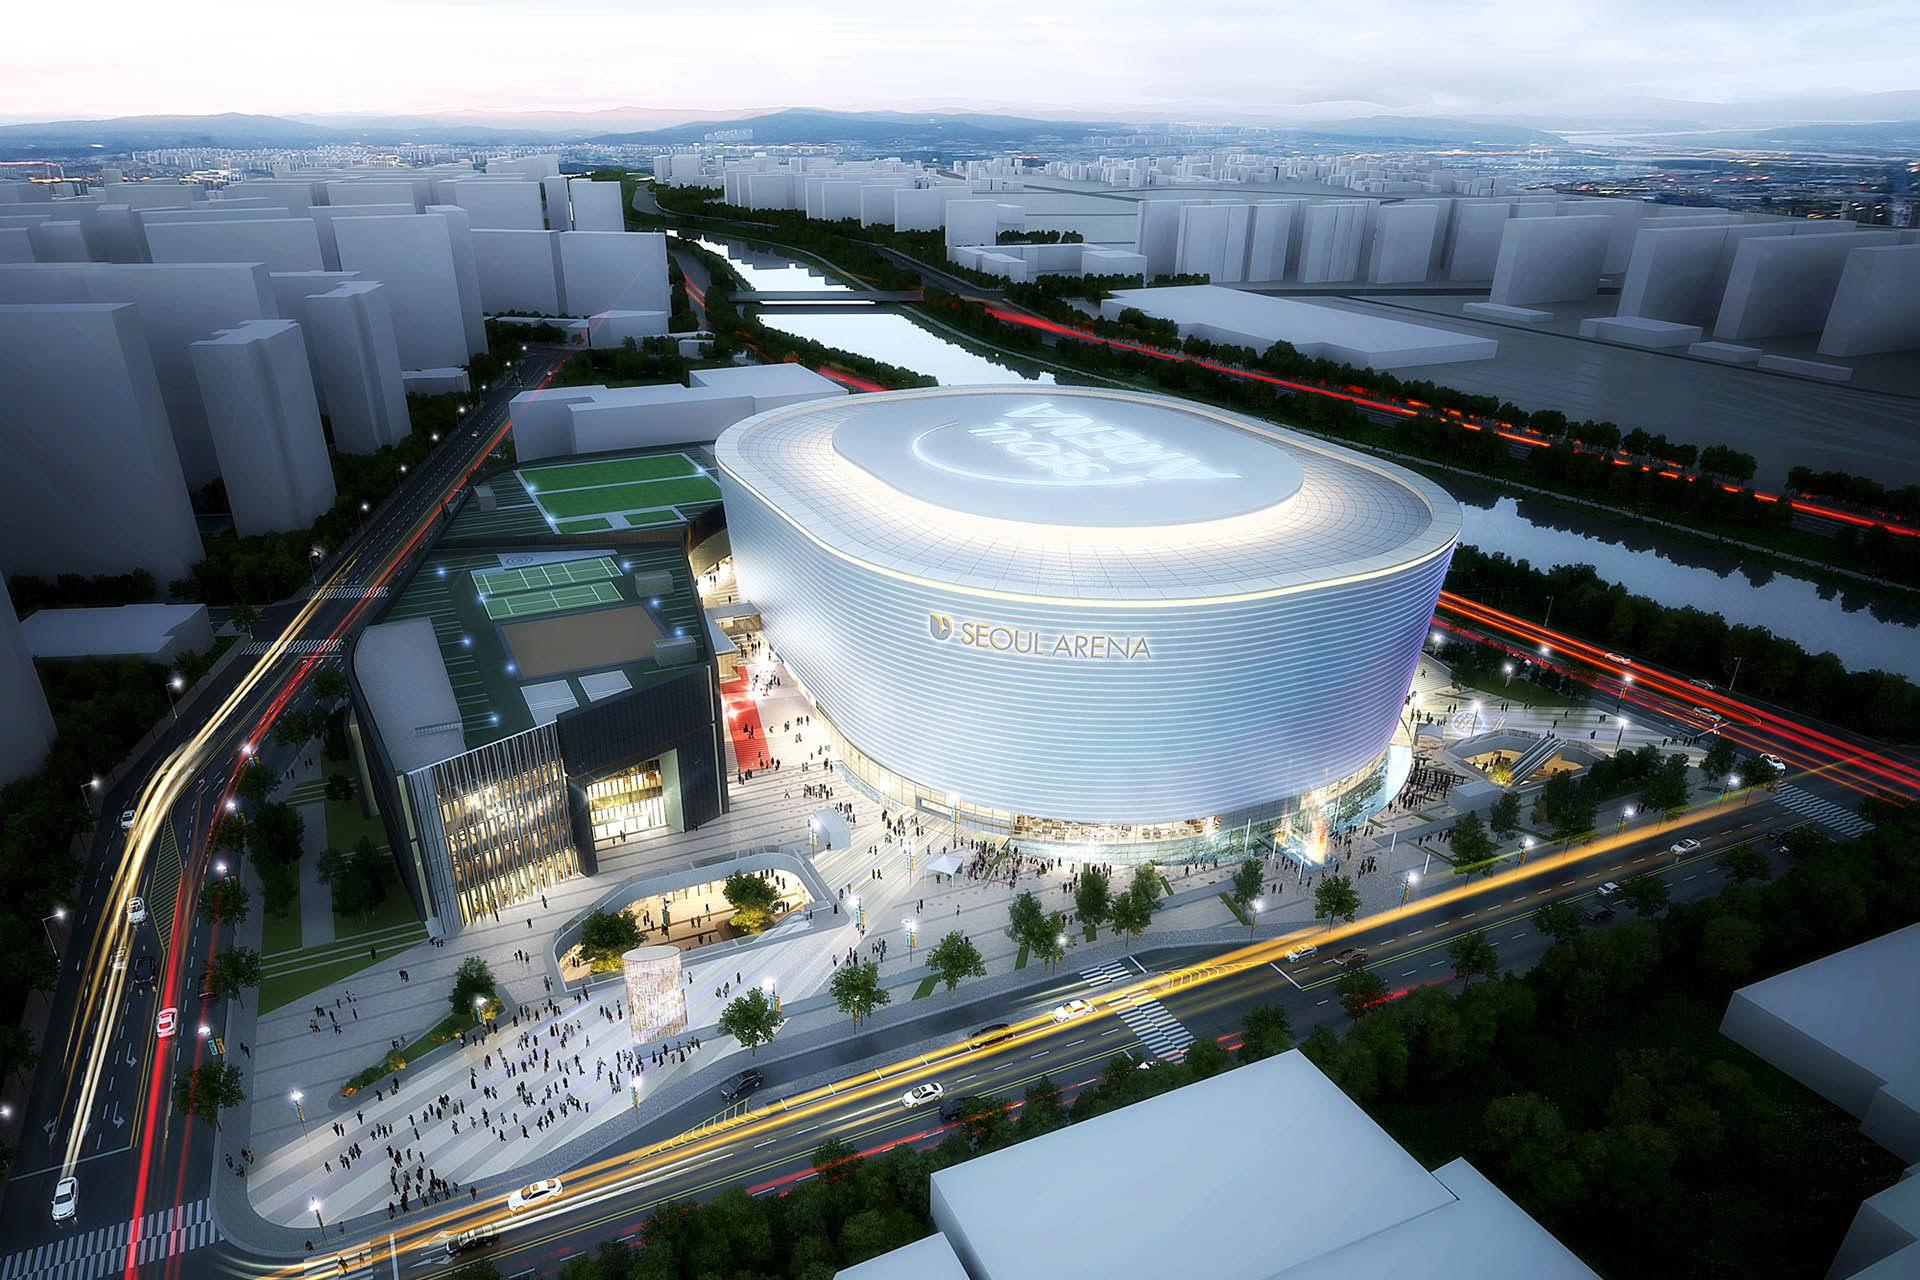 Seoul Arena K-pop Performance Center to Open